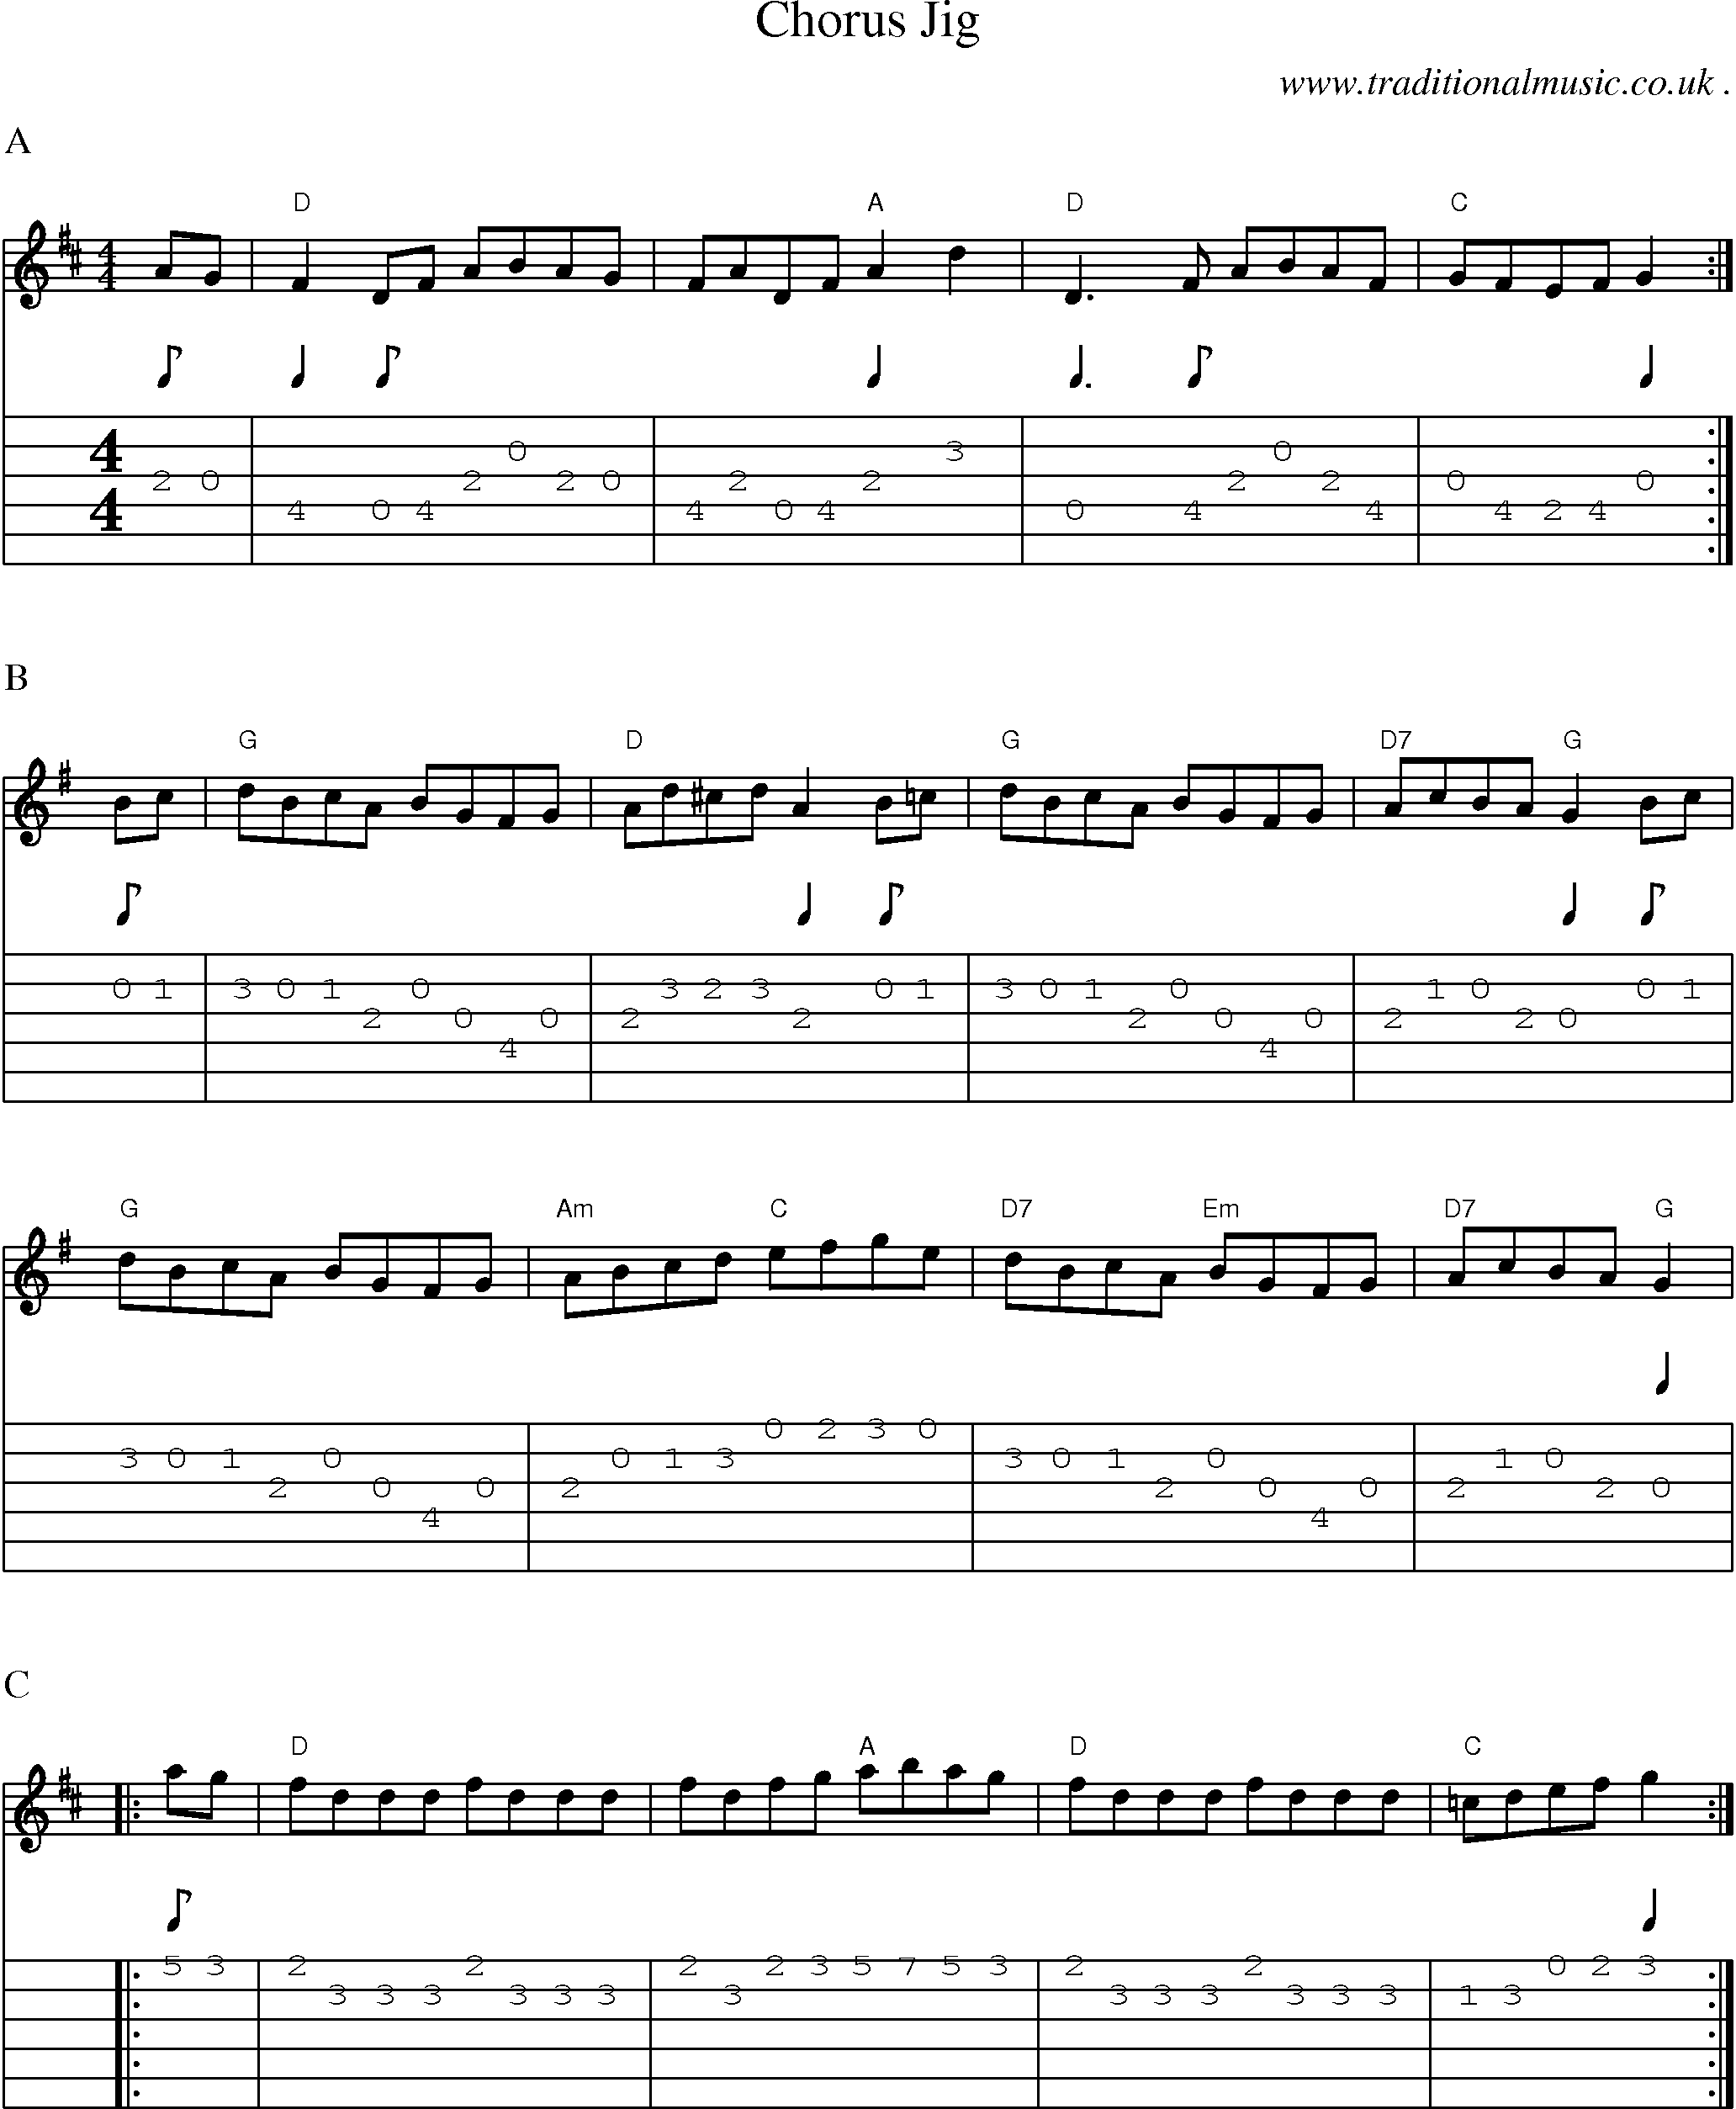 Music Score and Guitar Tabs for Chorus Jig